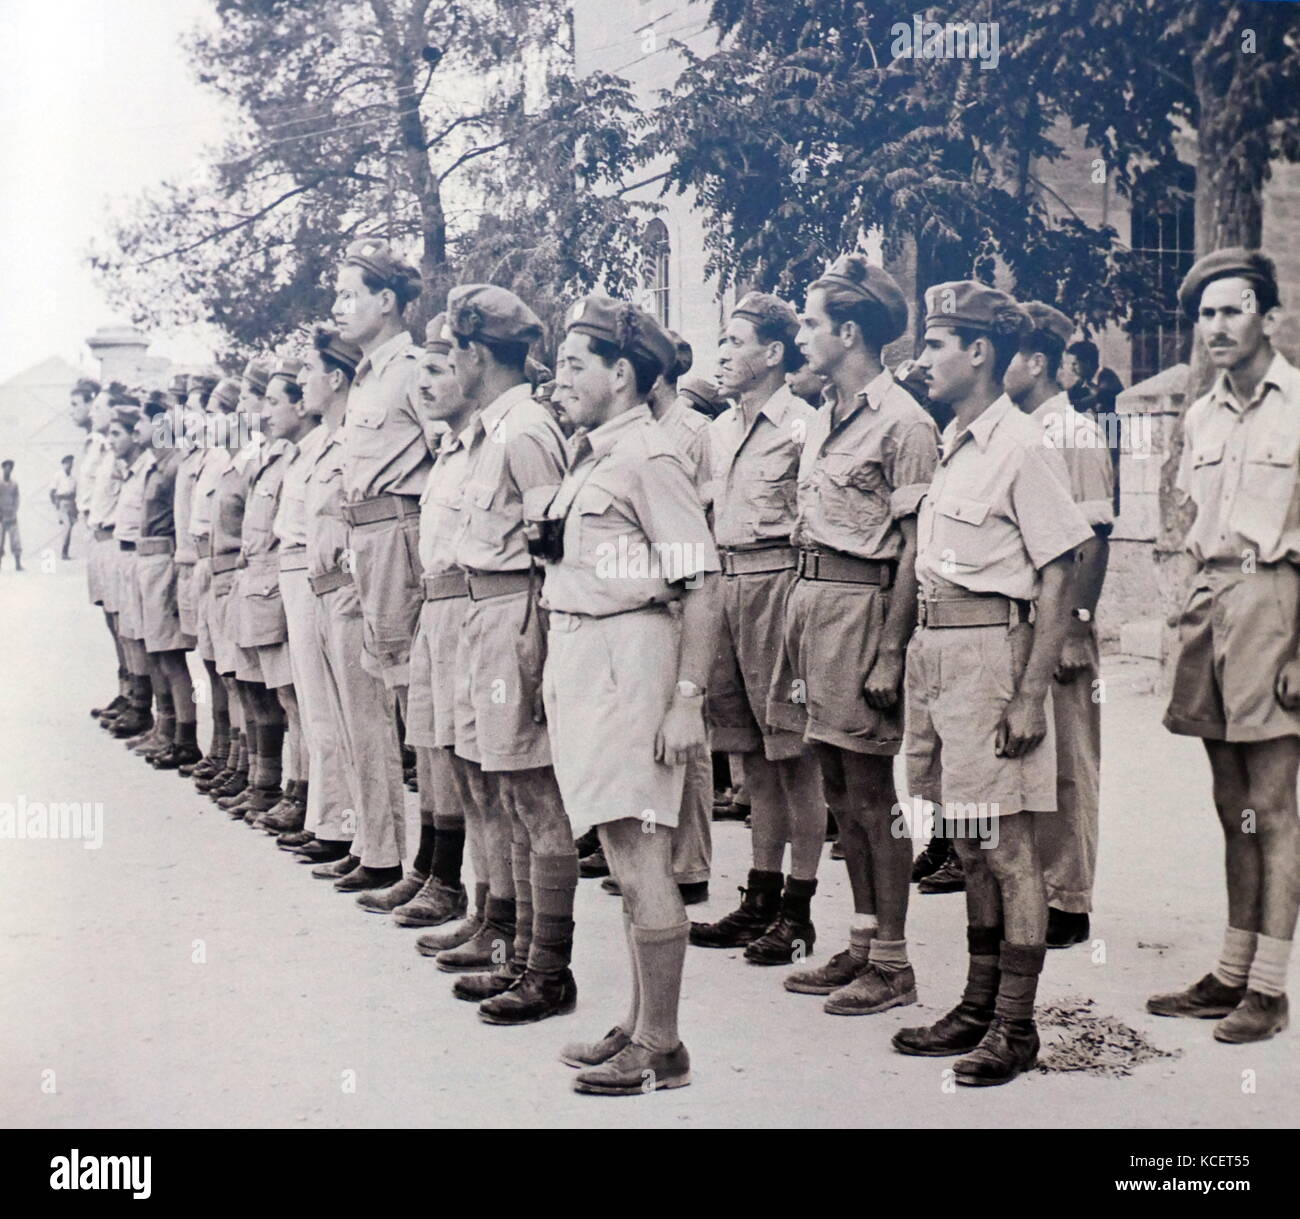 Parade of the newly formed, Israeli Army established during Israel's War of independence 1948 Stock Photo